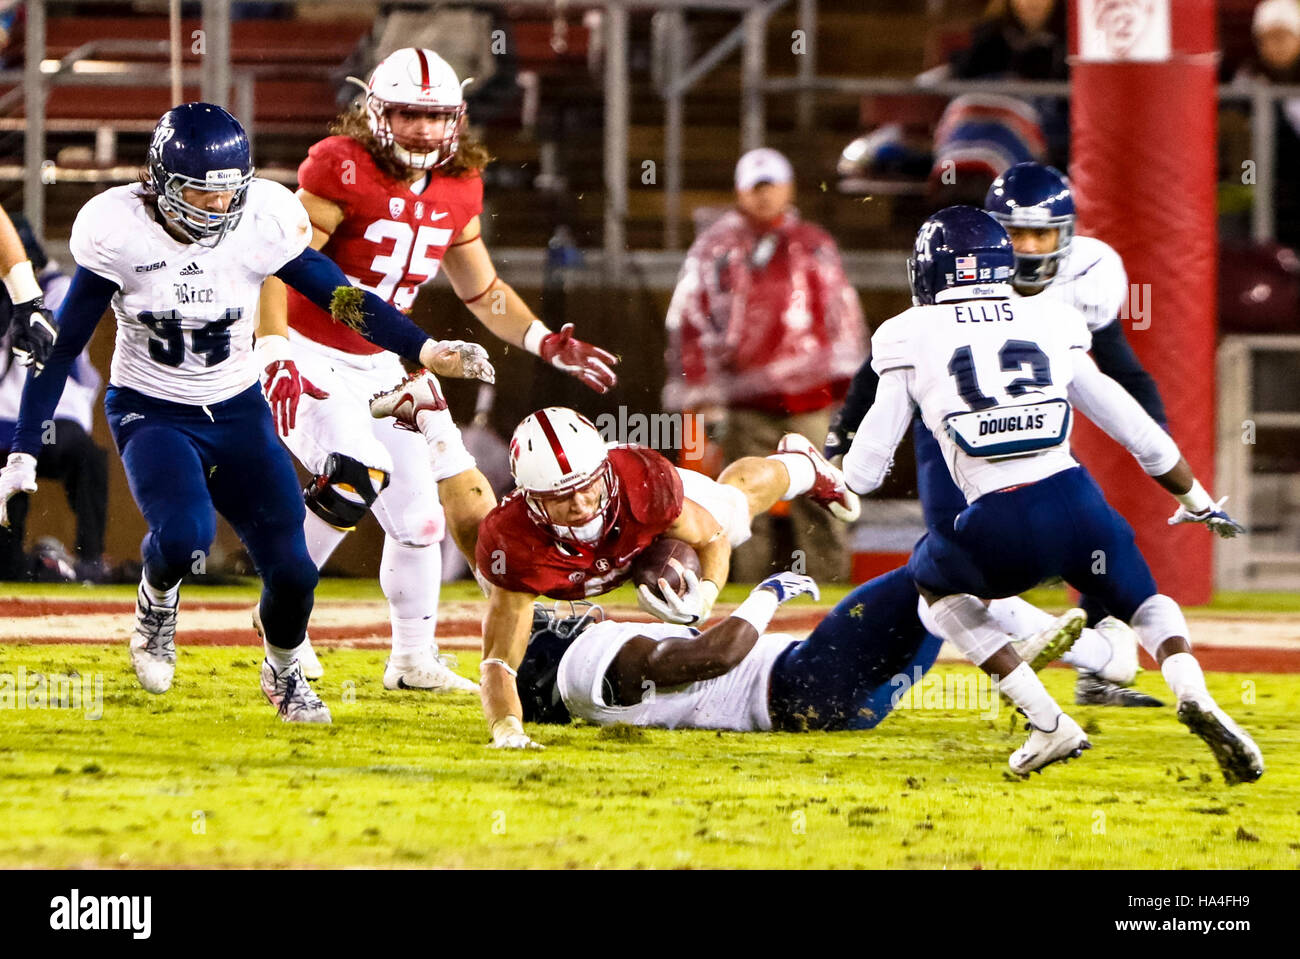 Palo Alto, California, USA. 26th Nov, 2016. Stanford Running Back Christian McCaffrey (5) goes airborne in NCAA football action at Stanford University, featuring the Rice Owls visiting the Stanford Cardinal. Stanford won the game 41-17. © Seth Riskin/ZUMA Wire/Alamy Live News Stock Photo